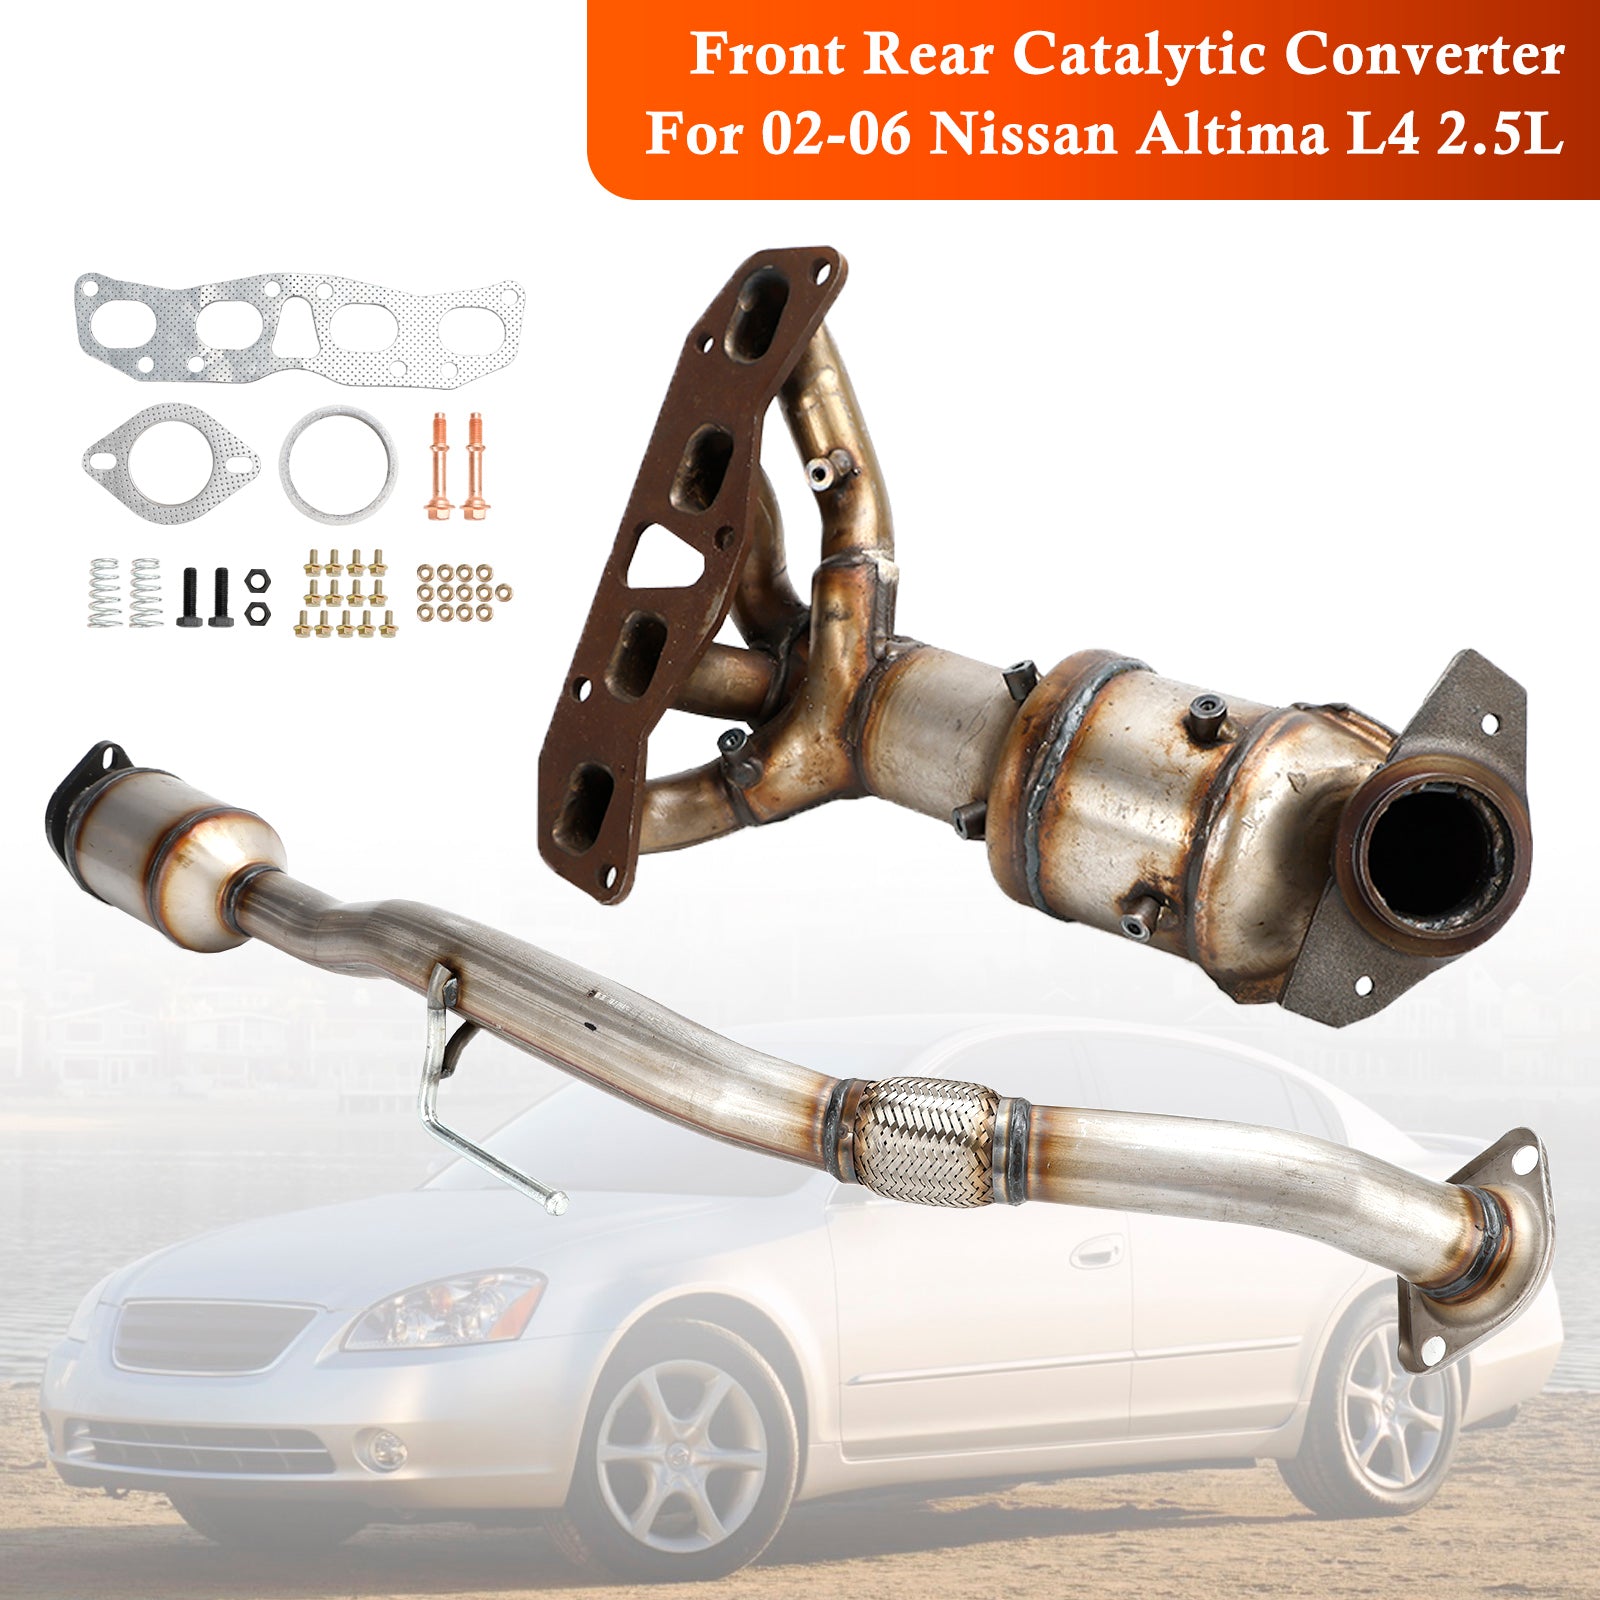 Nissan 2002-2006 Altima 2.5L Direct Pair Front Rear Catalytic Converter - 0